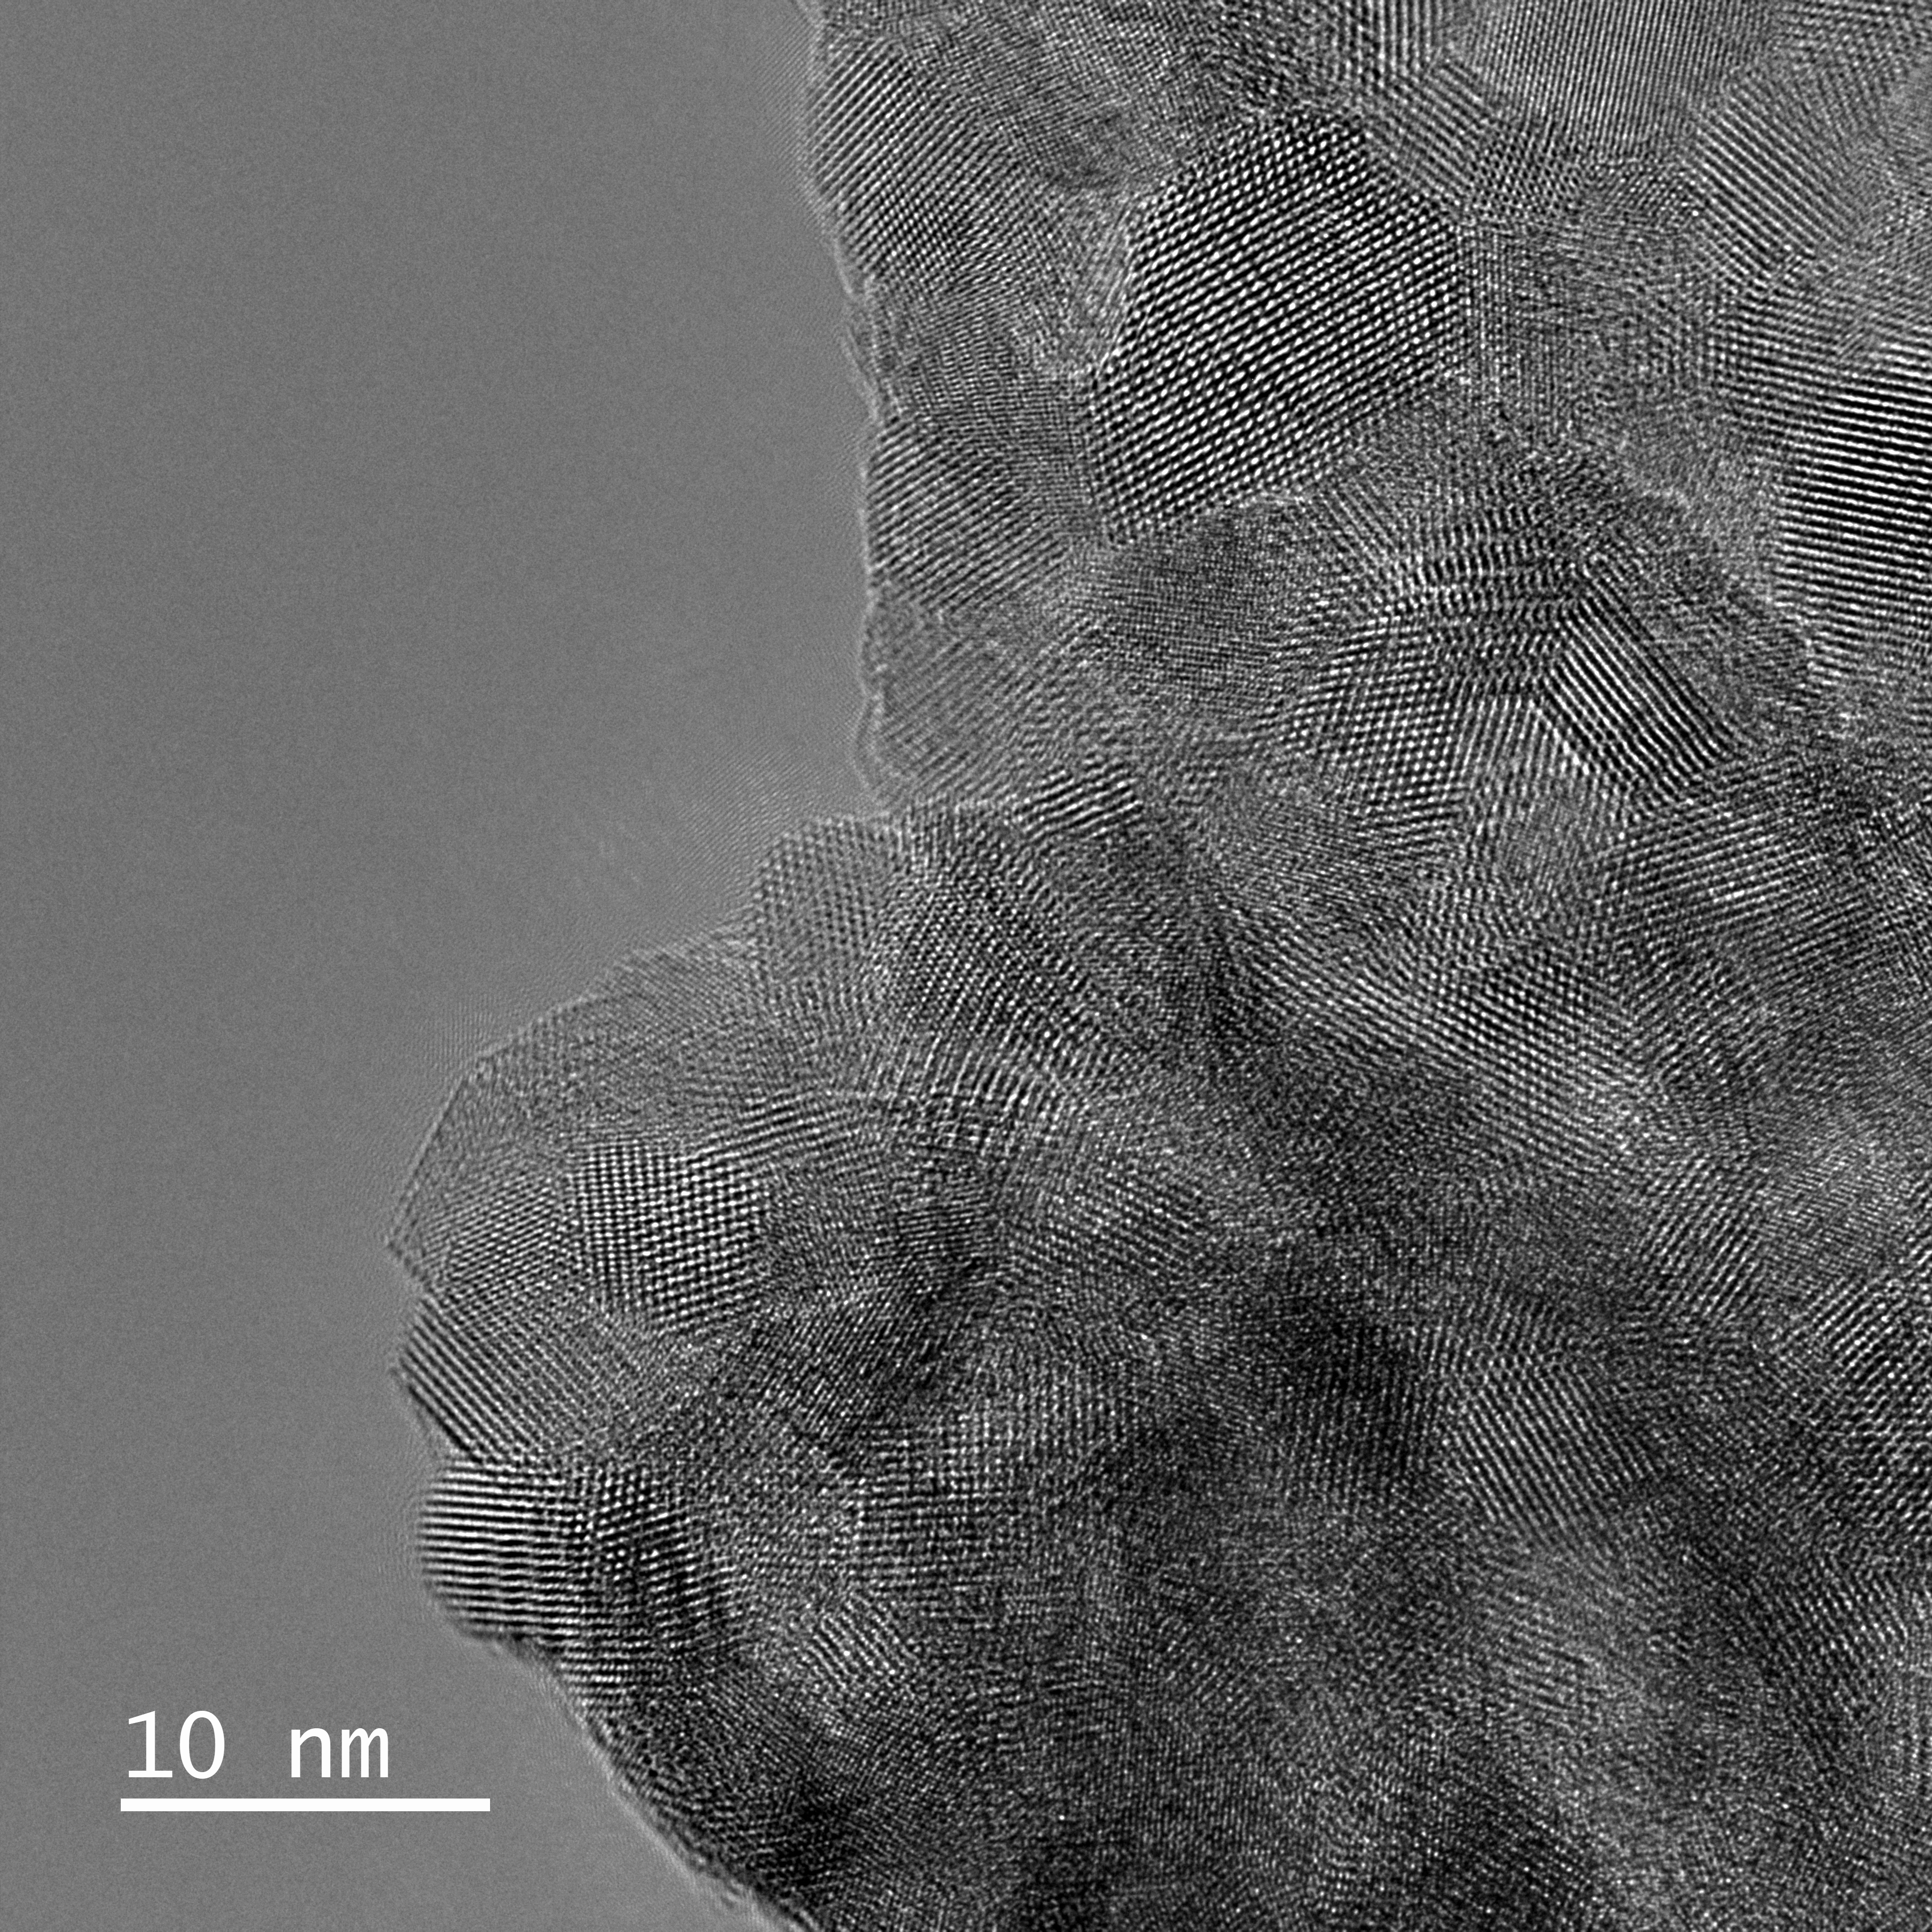 HRTEM Micrograph of CoCe mixed oxide. Courtesy of H.N. Pham